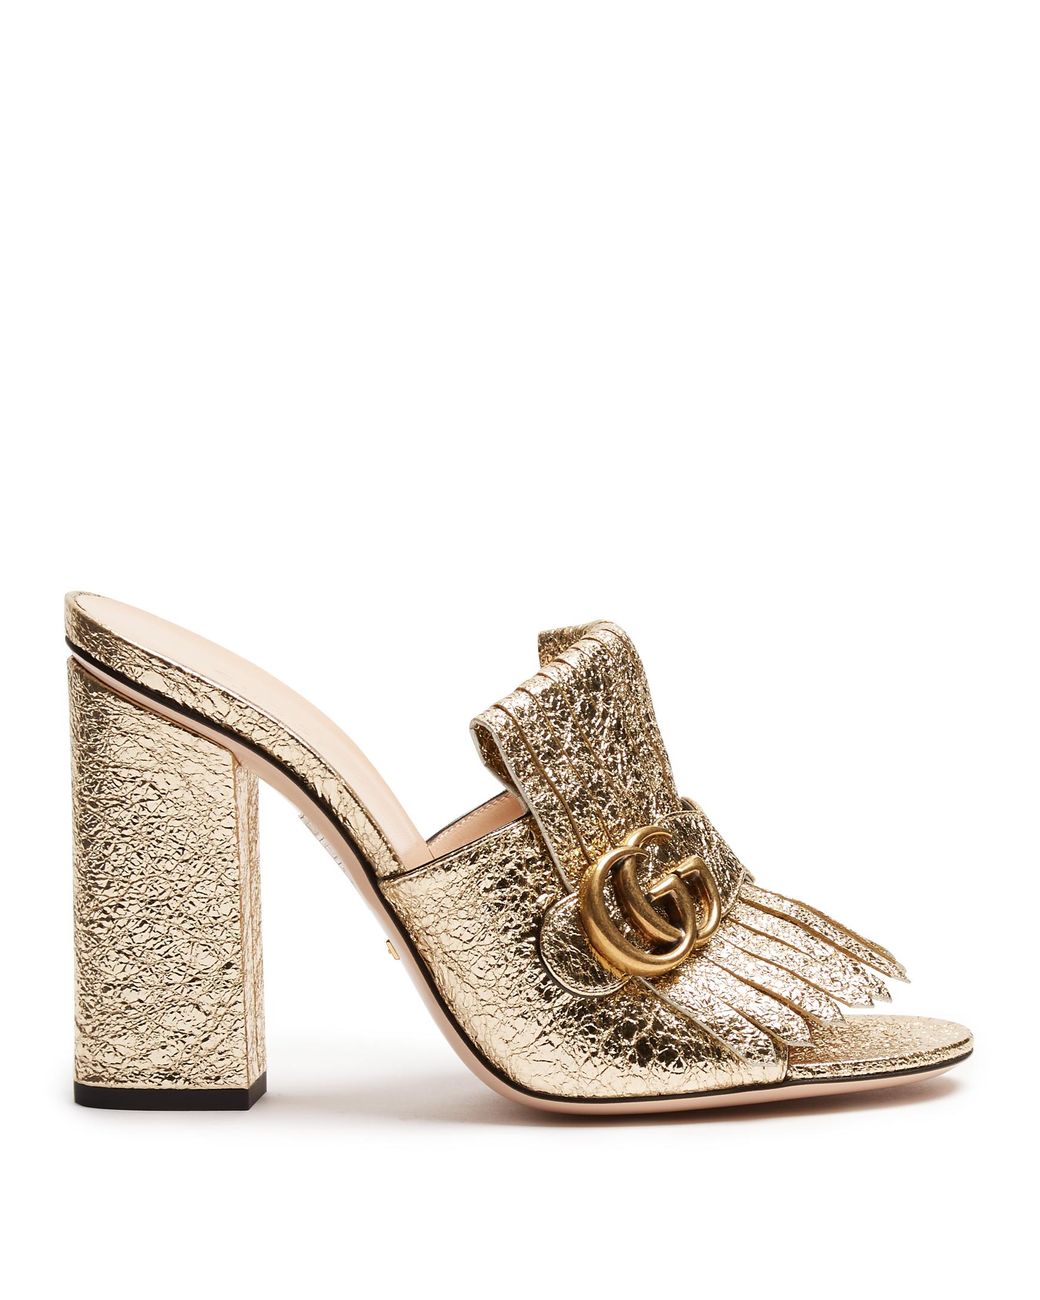 Gucci Marmont Fringed Leather Sandals in Metallic | Lyst